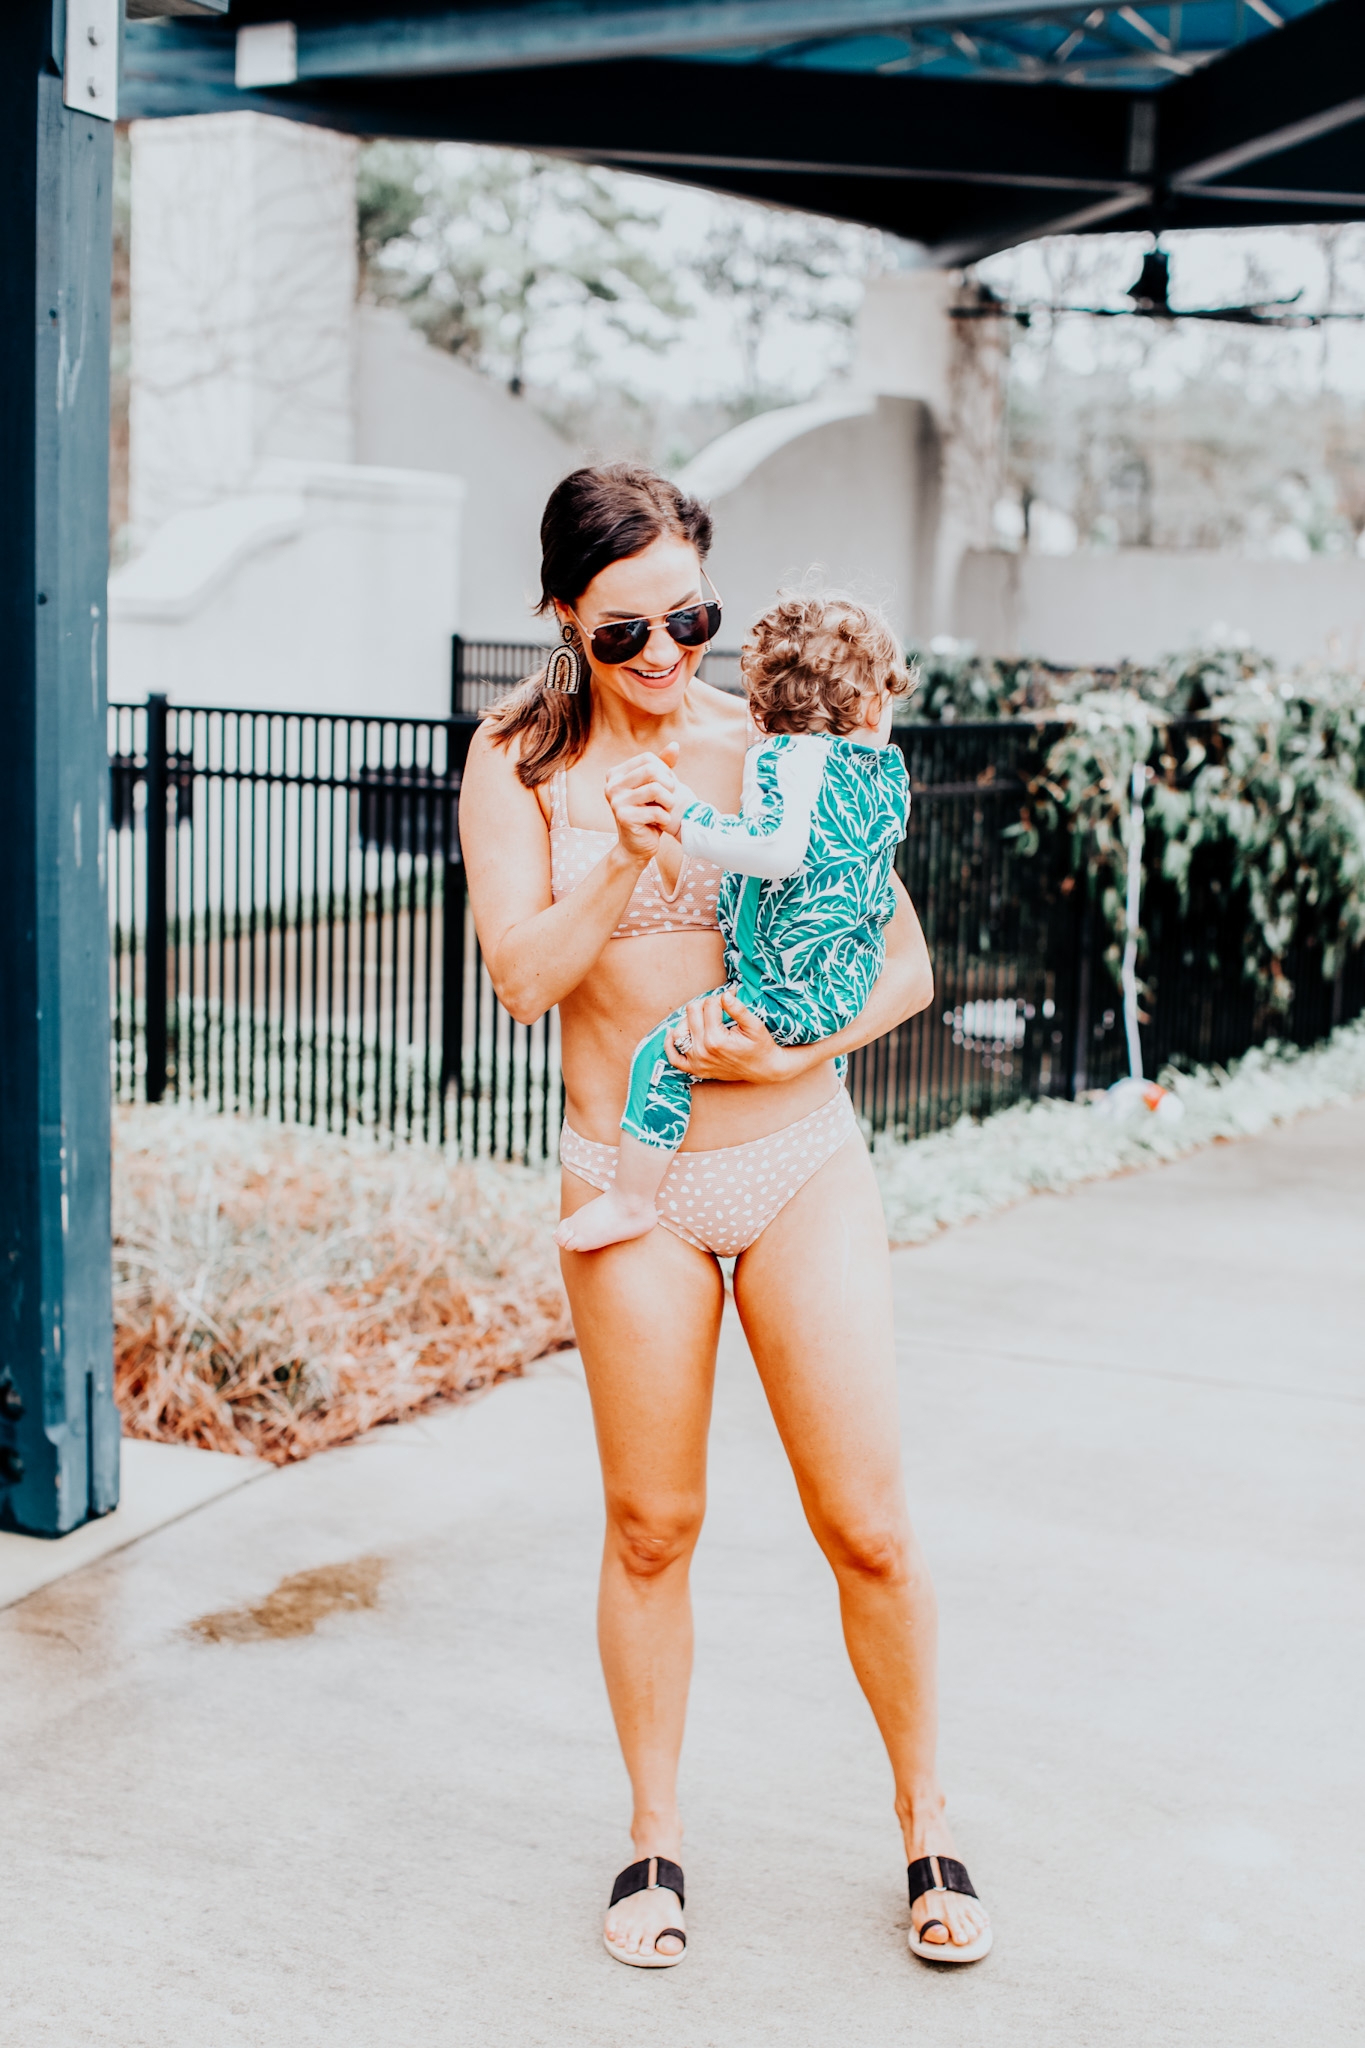 My Favorite Aerie Swimsuits This Summer - Healthy By Heather Brown